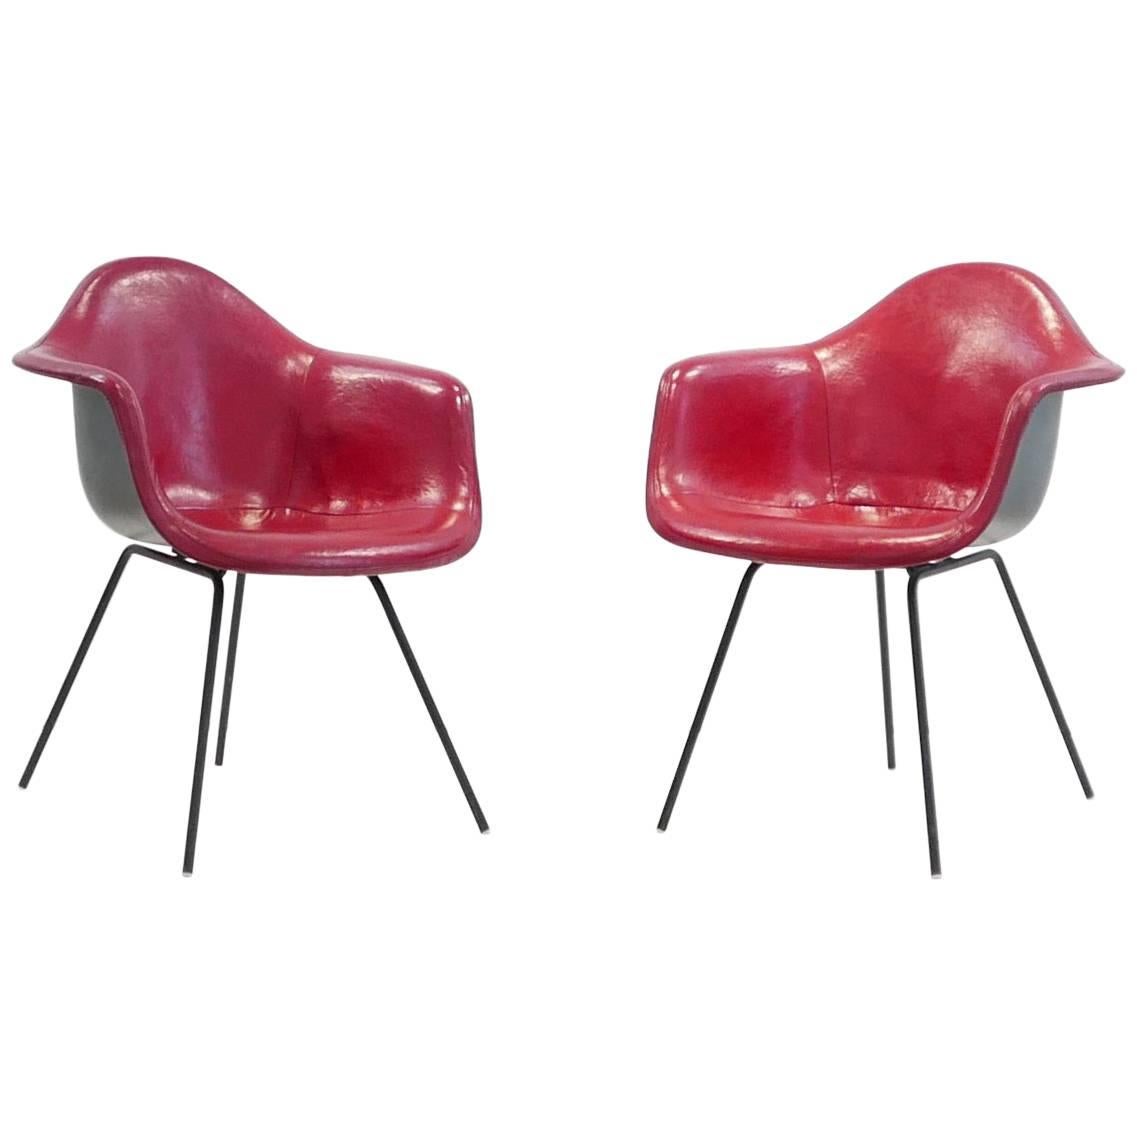 Paire de chaises "DAX" de Charles and Ray Eames